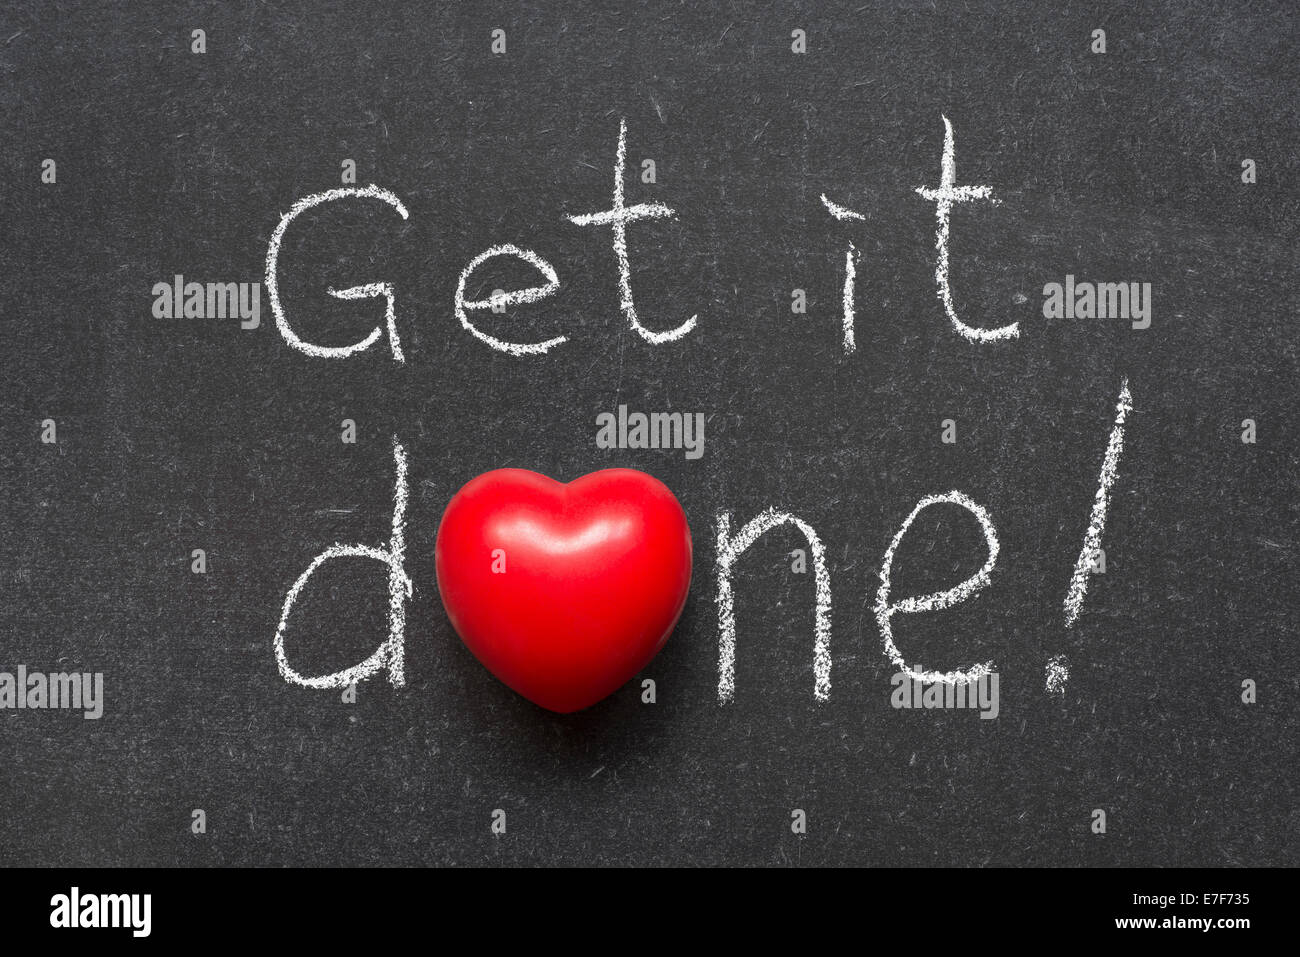 get it done exclamation handwritten on chalkboard with heart symbol instead of O Stock Photo